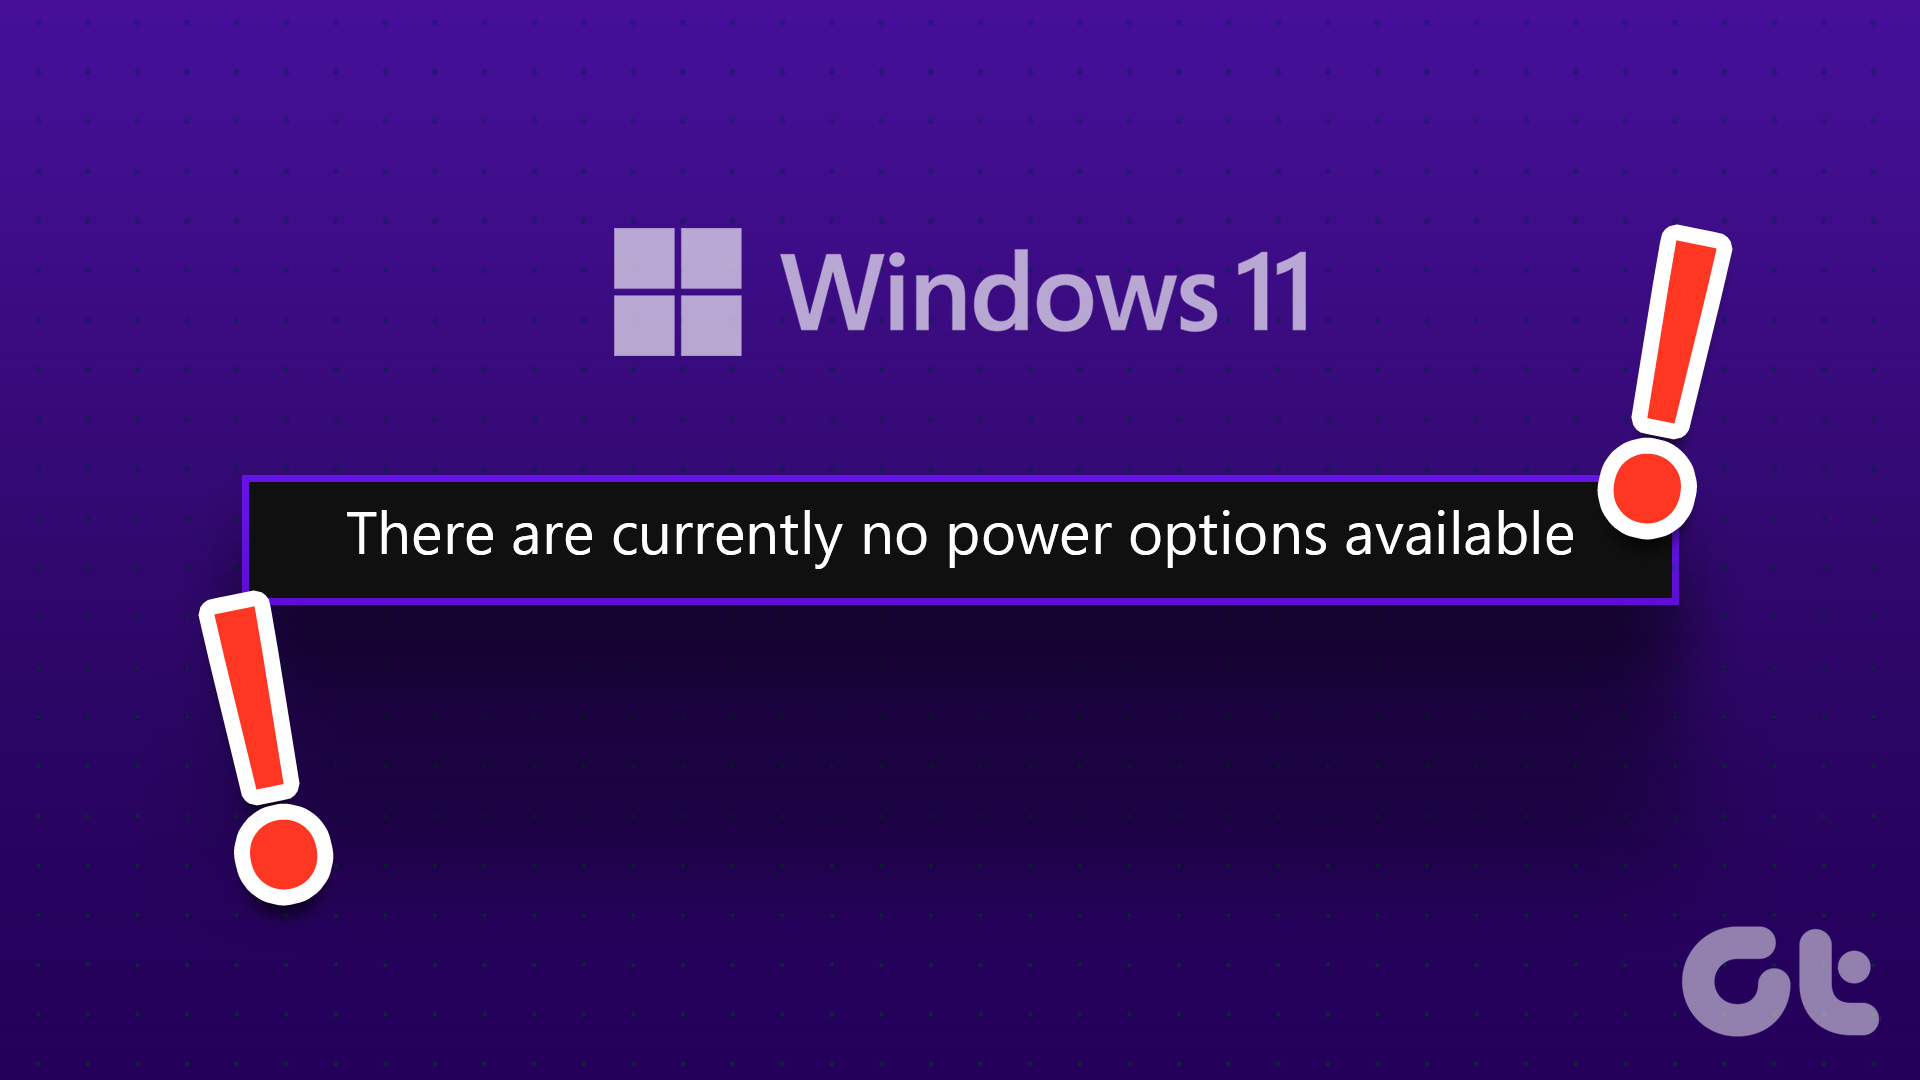 Fix There Are Currently No Power Options Available in Windows